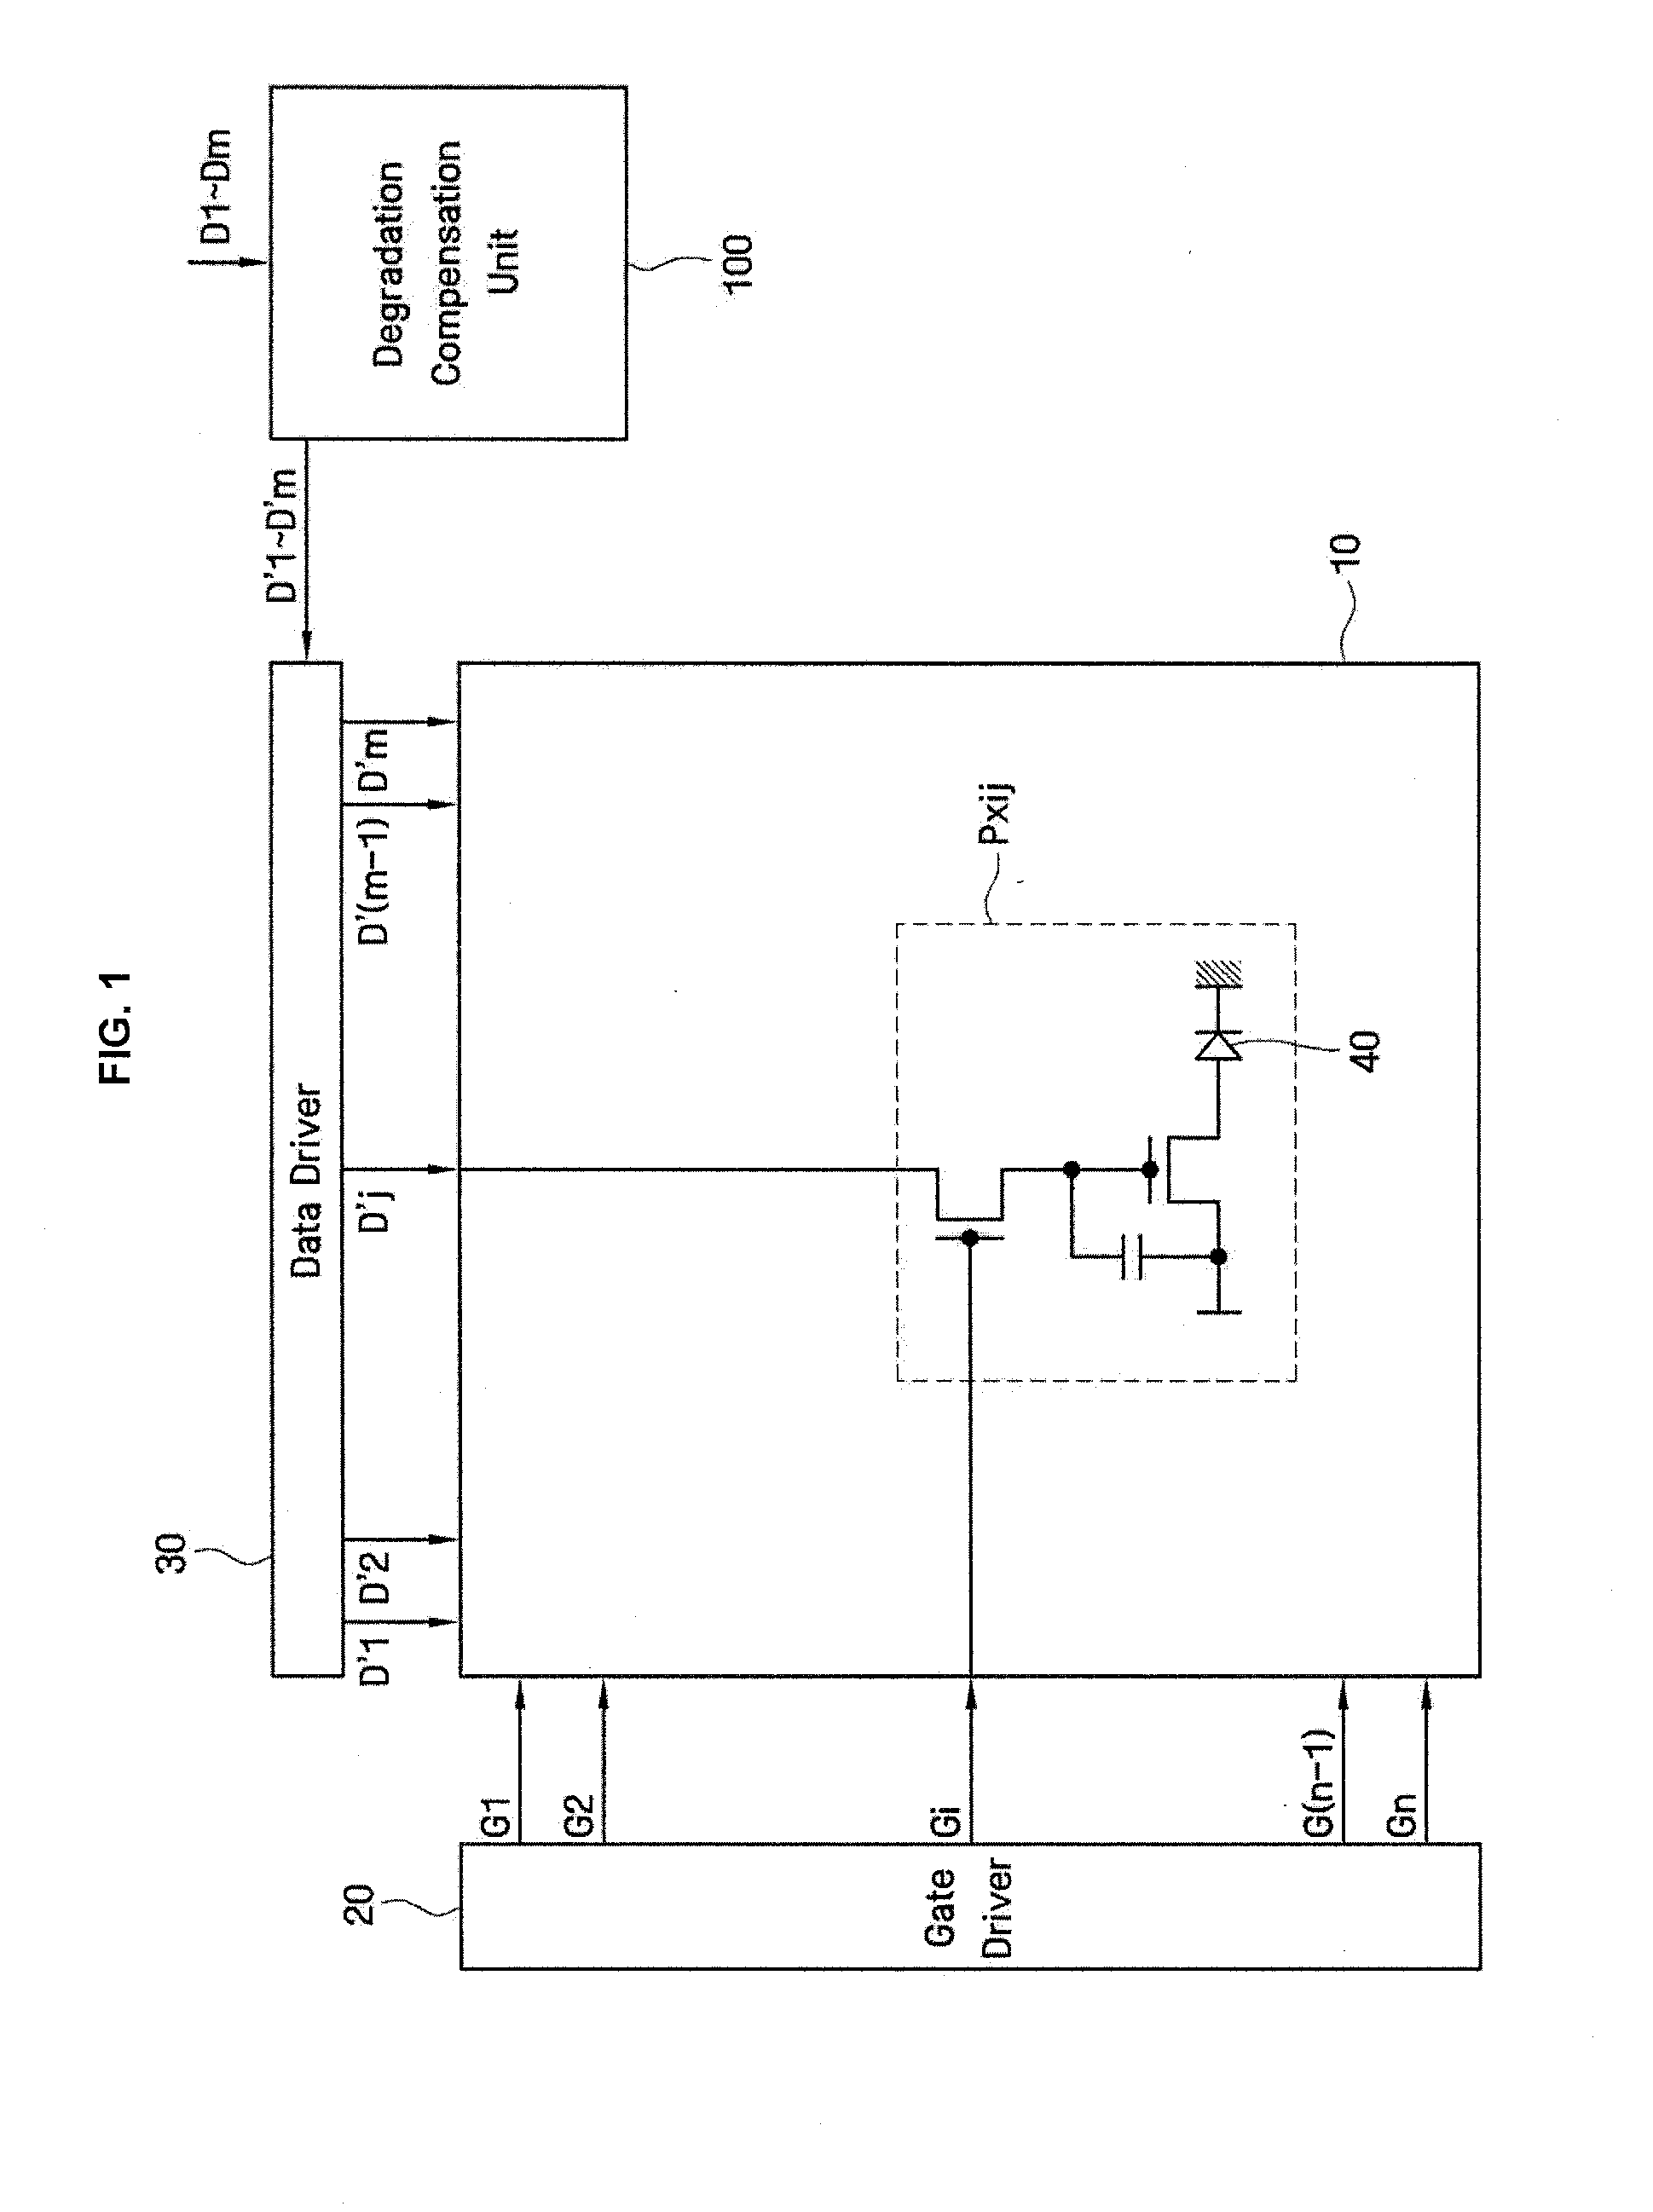 Degradation compensation unit, light-emitting apparatus including the same, and method of compensating for degradation of light-emitting apparatus